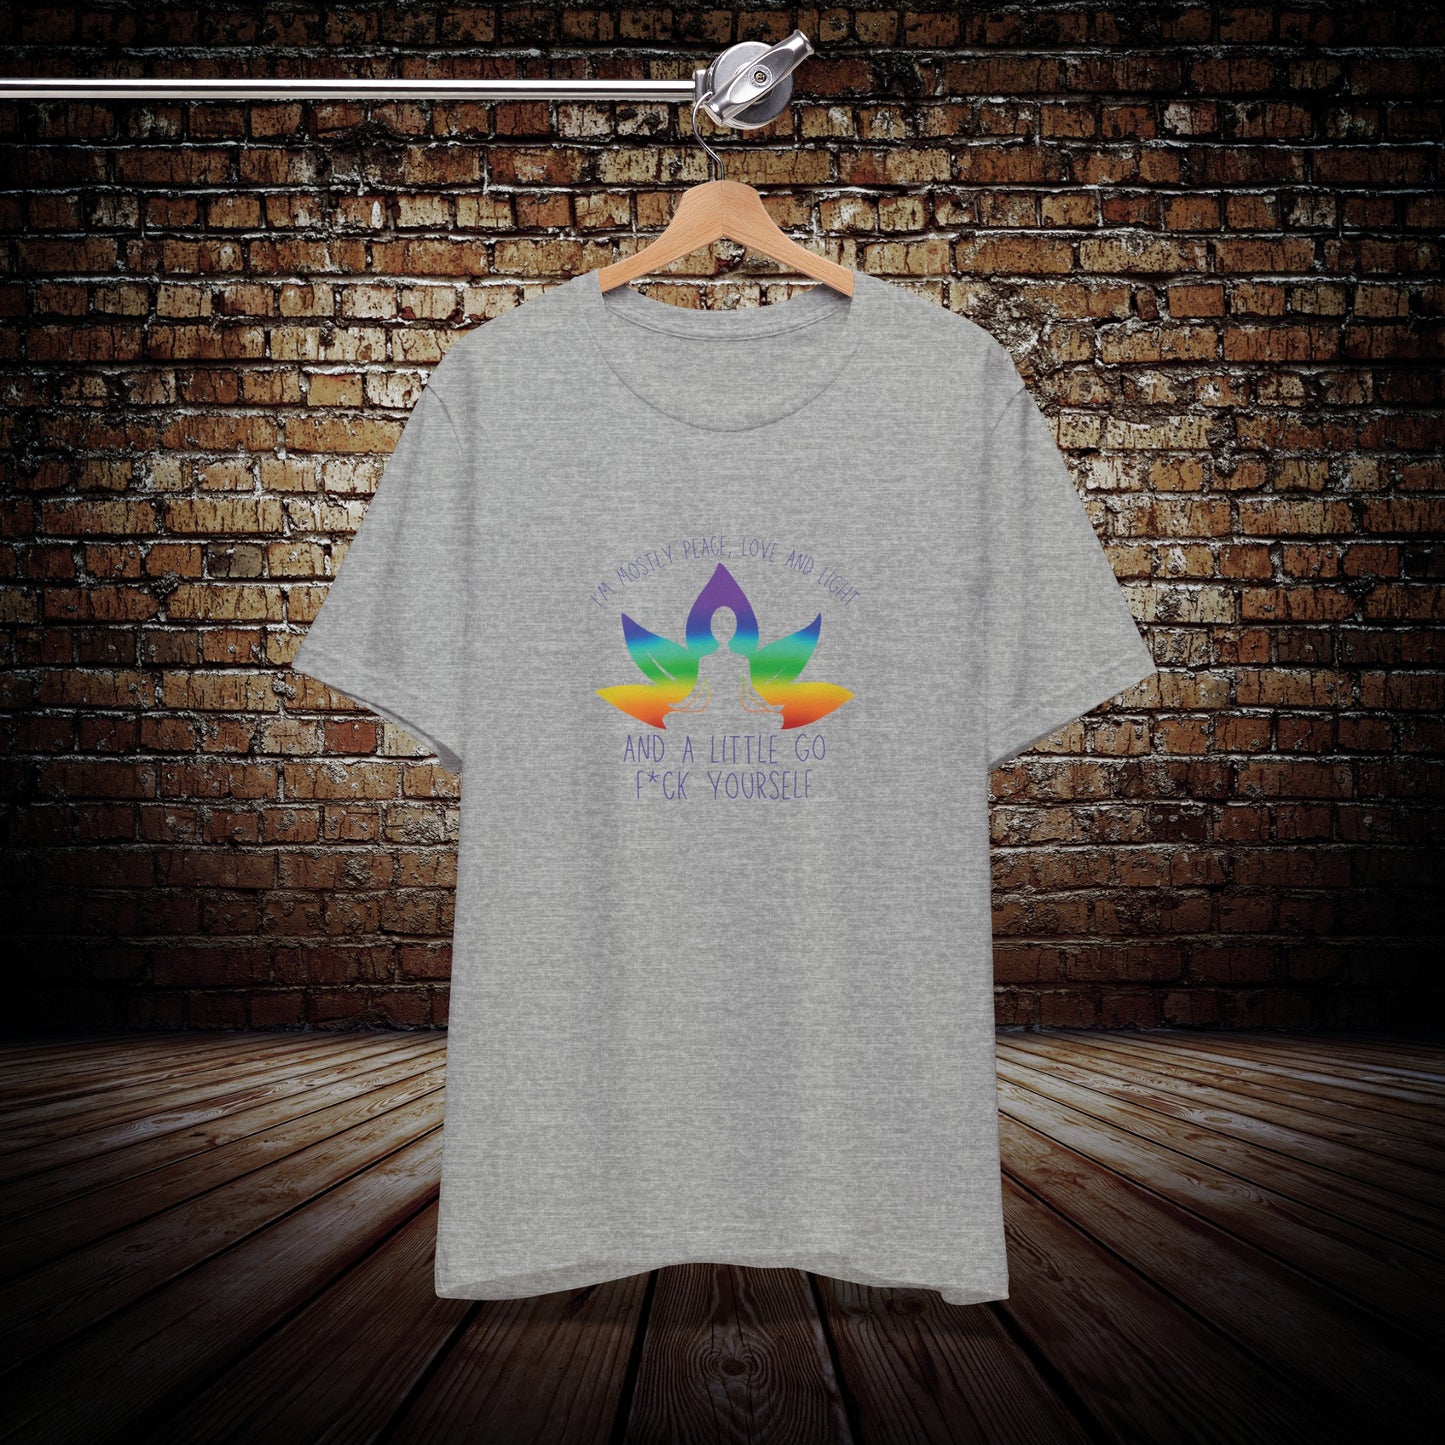 Mostly peace and love - Yoga Inspired T-Shirt